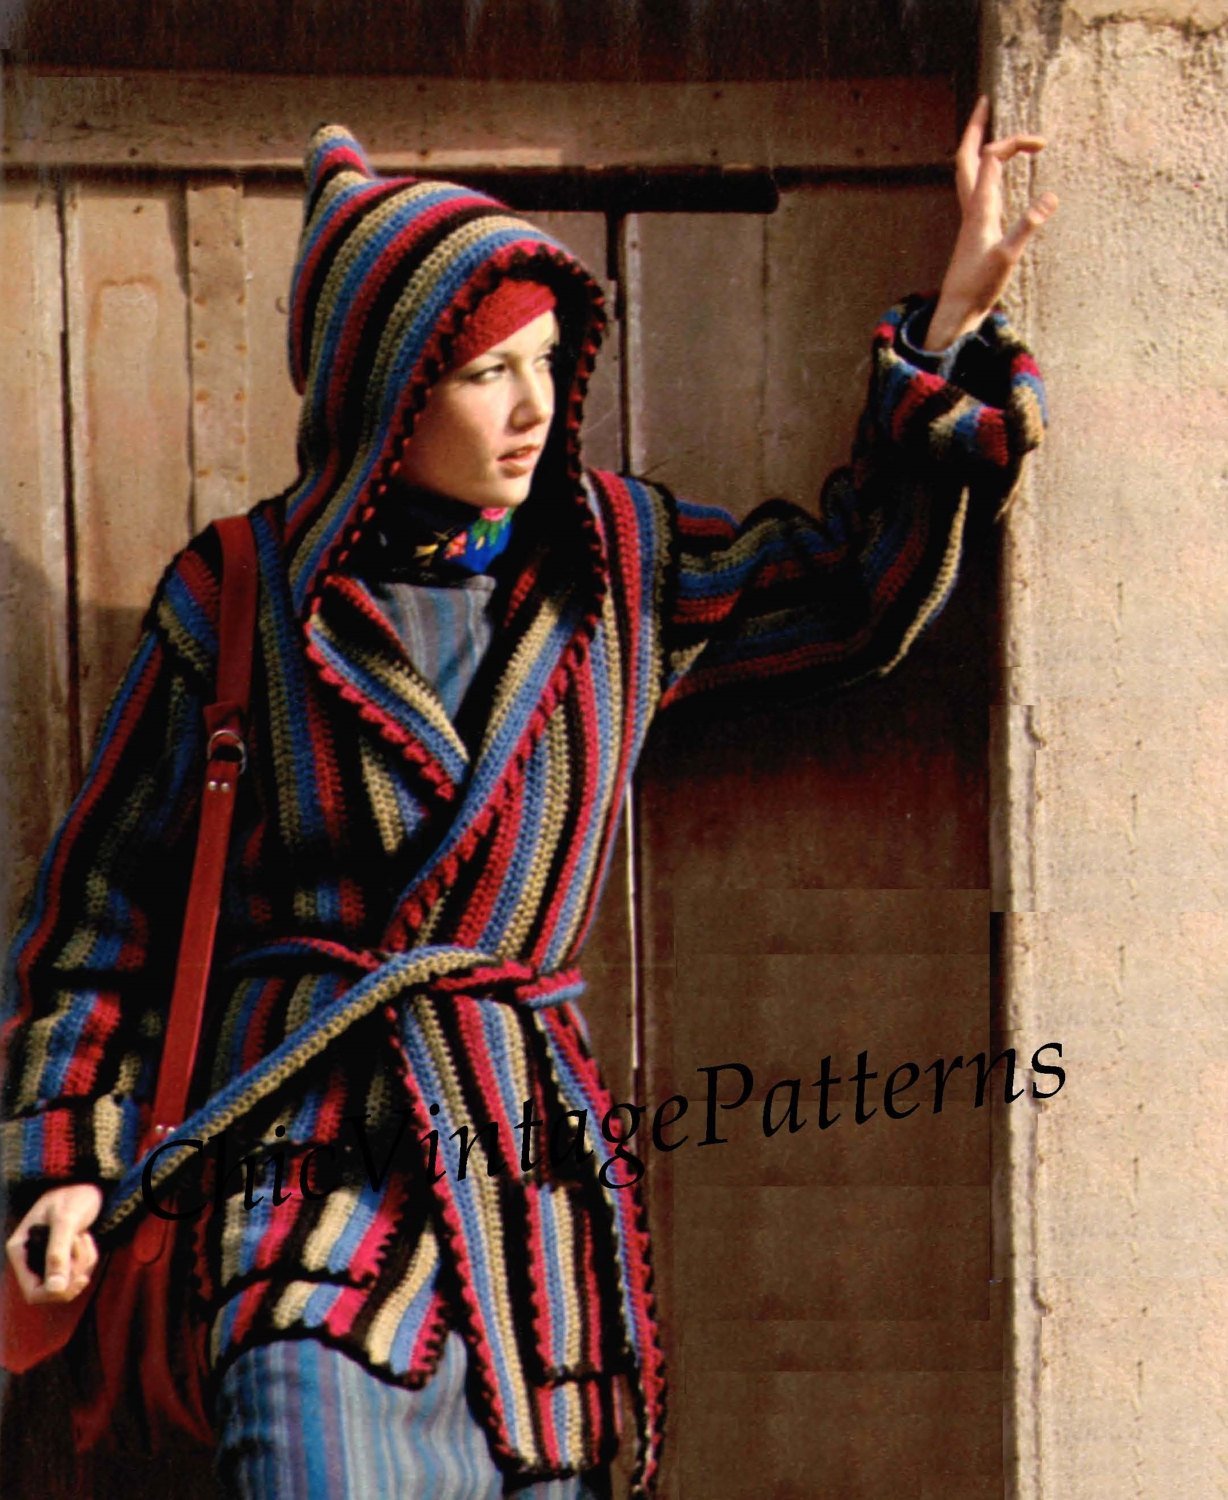 Crochet Jacket Pattern, Ladies Hooded Wrap Coat and Hat, Instant Download